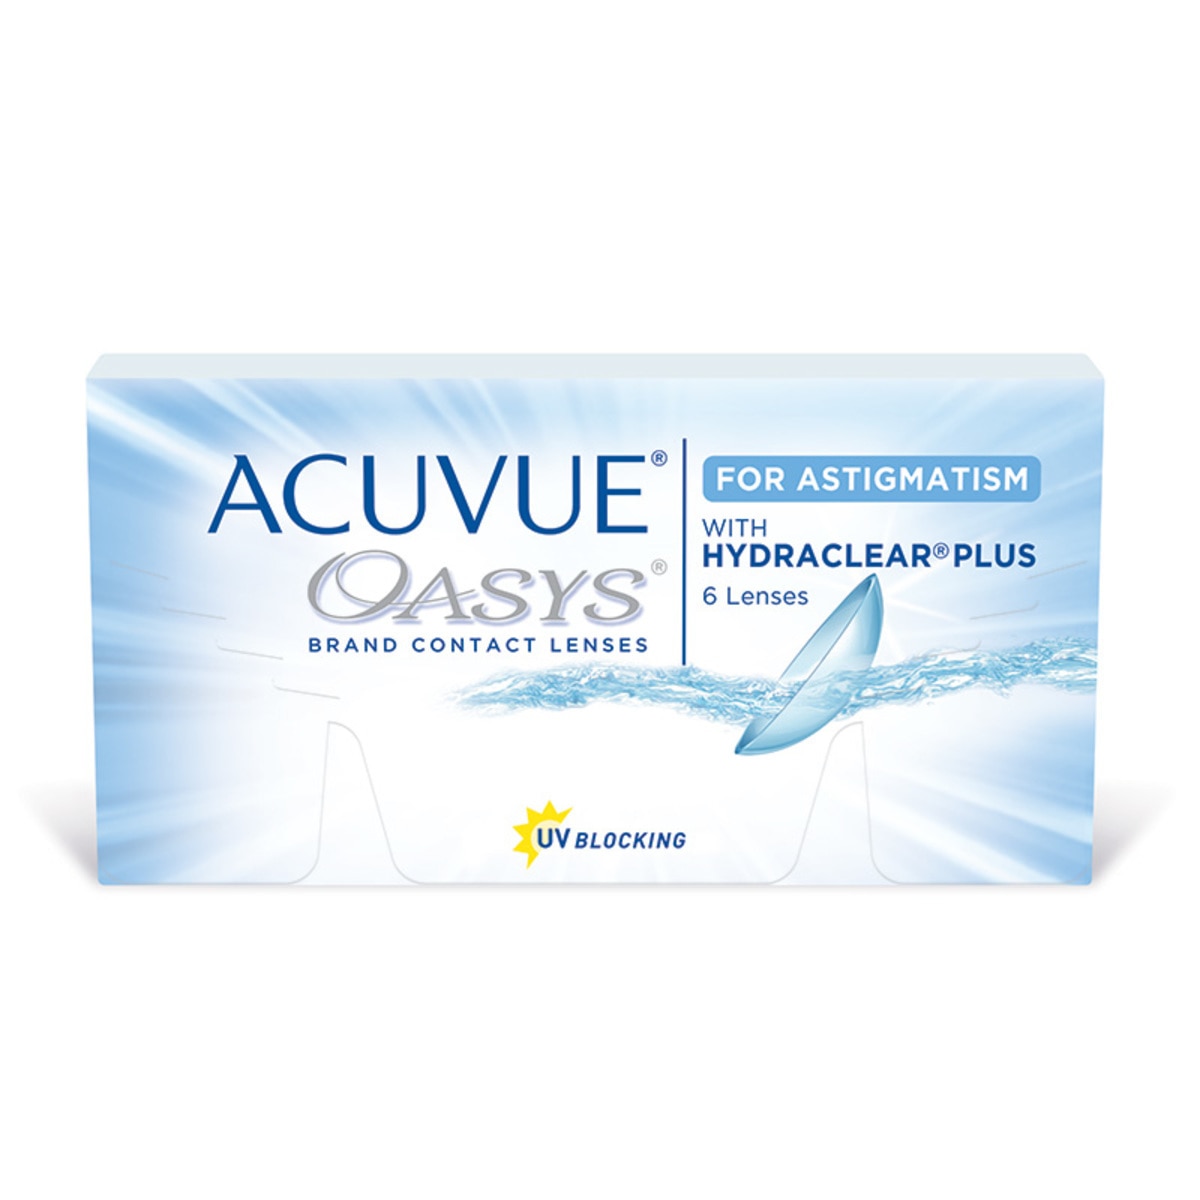 ACUVUE OASYS® con HYDRACLEAR Plus® para Astigmatismo (D -3.25, Cyl/Axis -1.75/180)